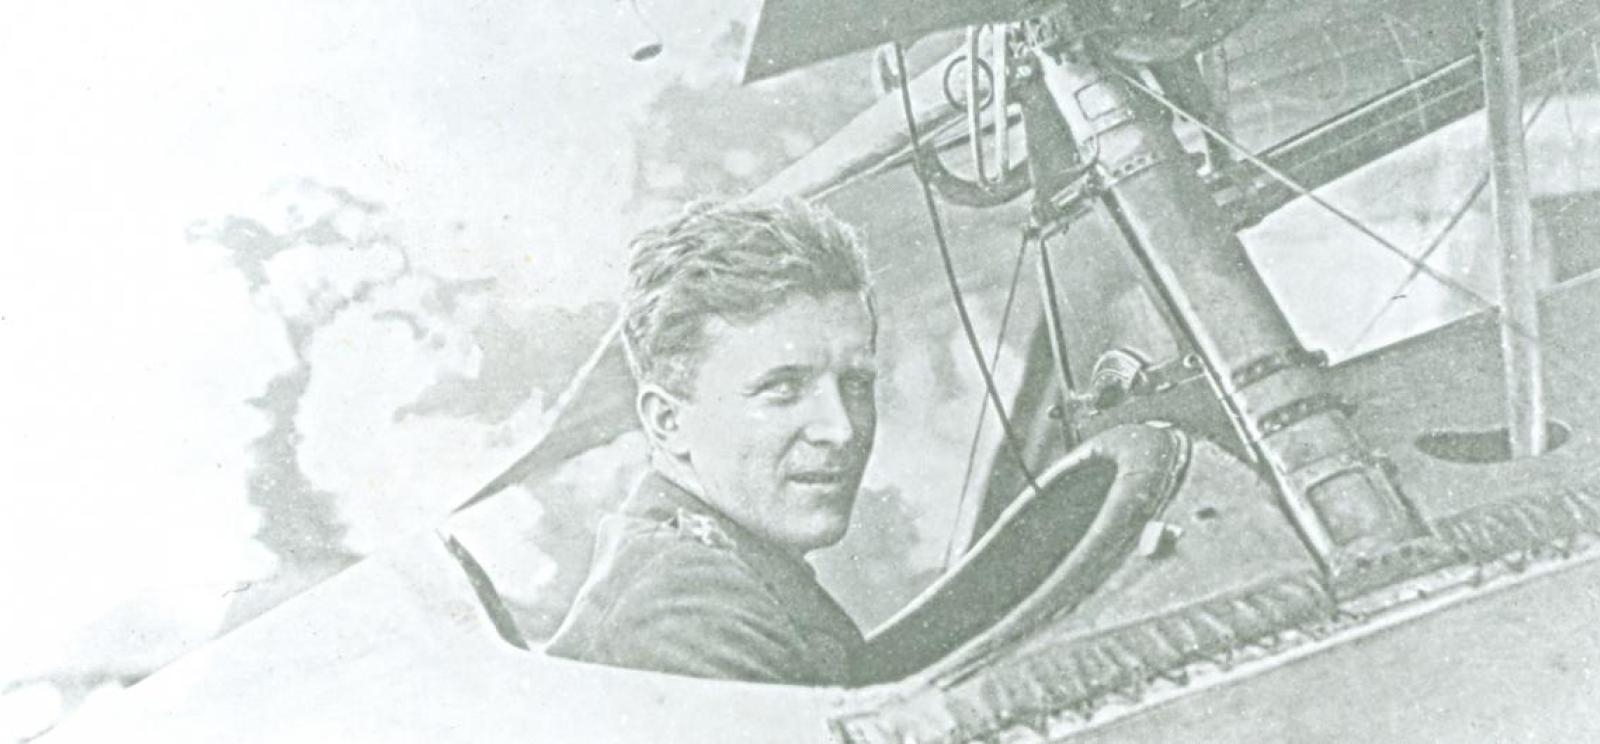 Black and white photograph of a WWI-era fighter pilot in the cockpit of a plane, looking at the viewer.